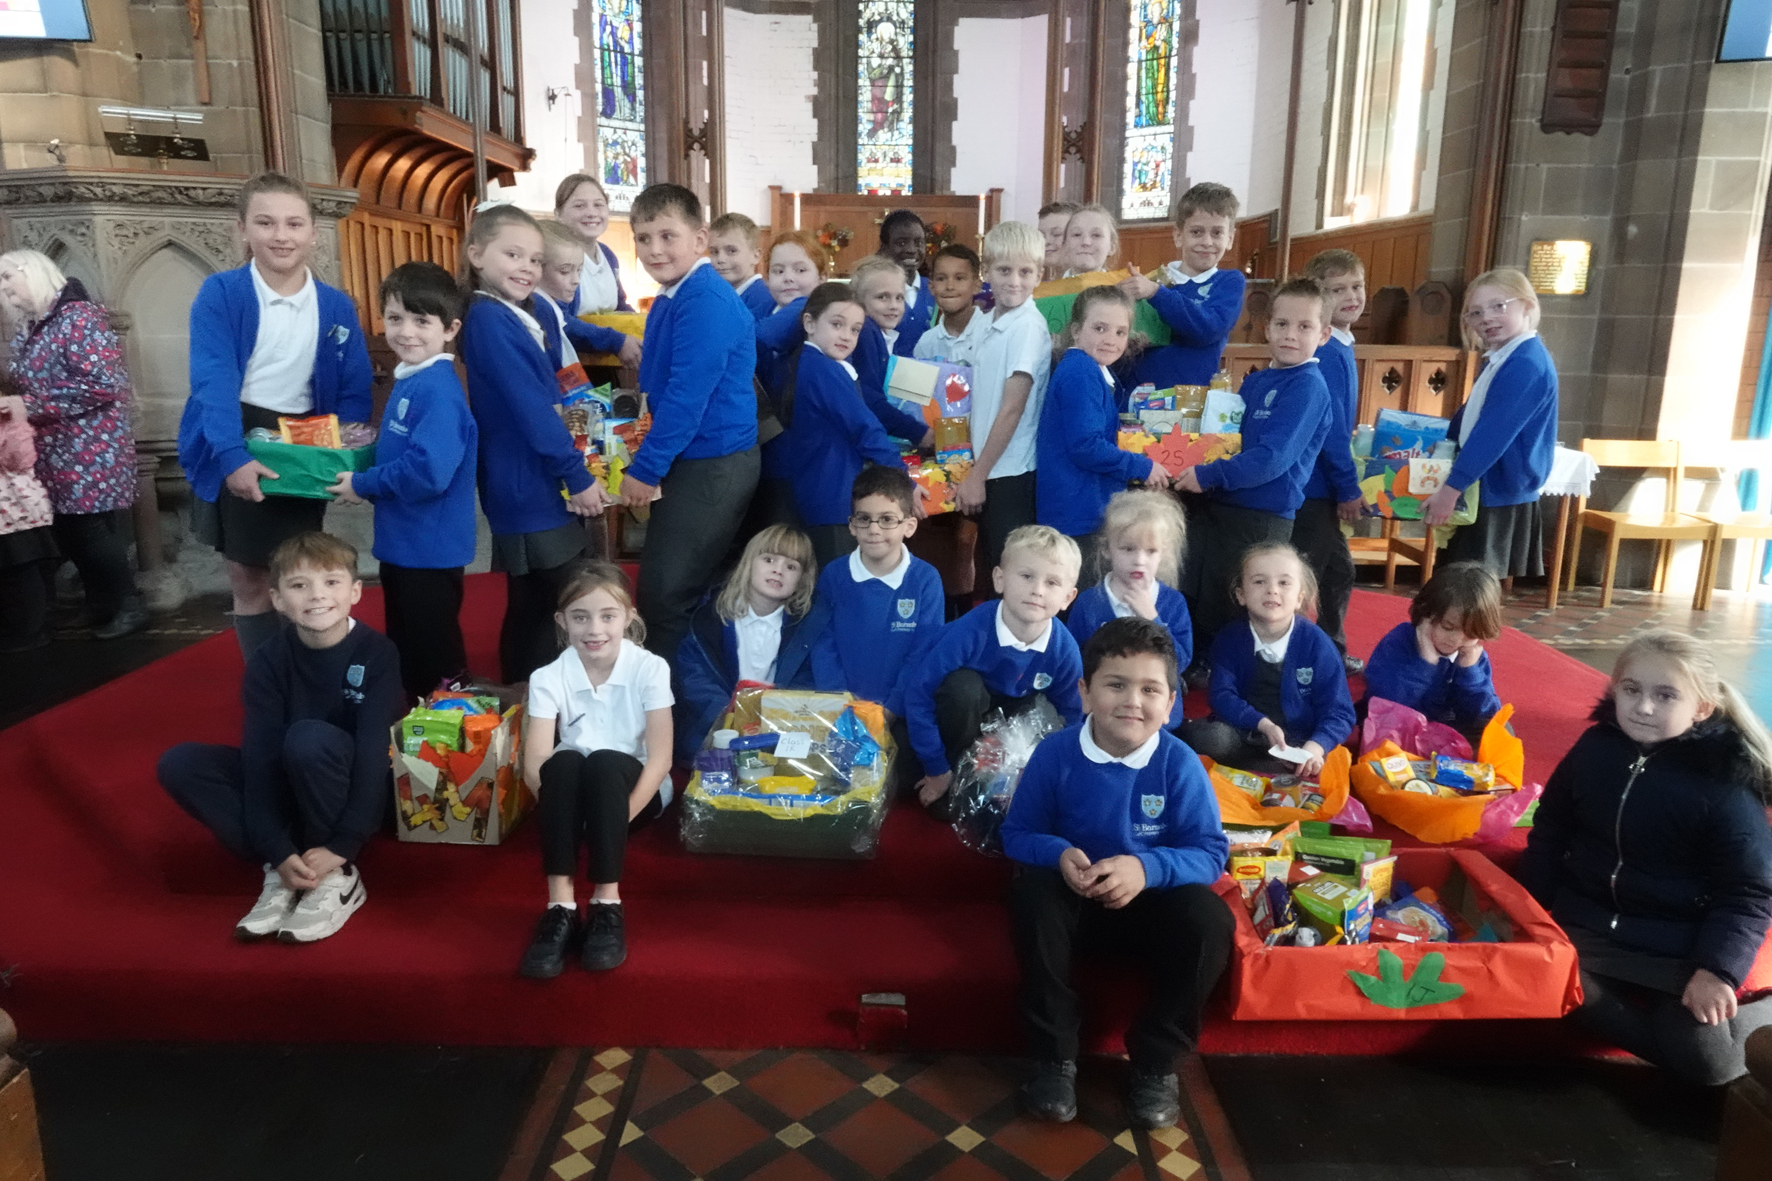 Children in front of the altar at St Barnabas Church with boxes full of harvest gifts